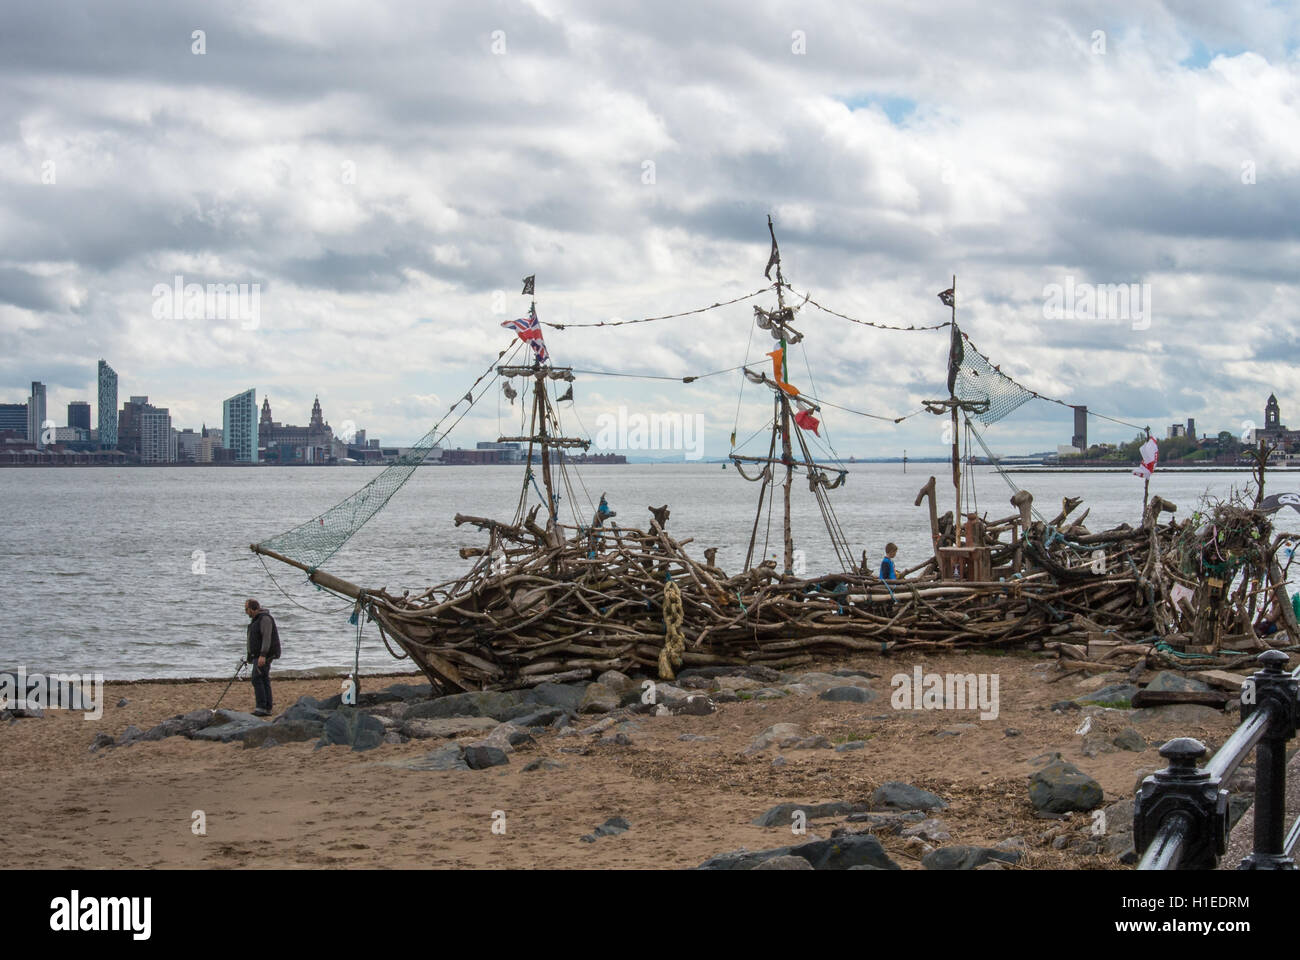 A man with a metal detector looks for treasure next to the Black Pearl ship New Brighton with Liverpool skyline Stock Photo